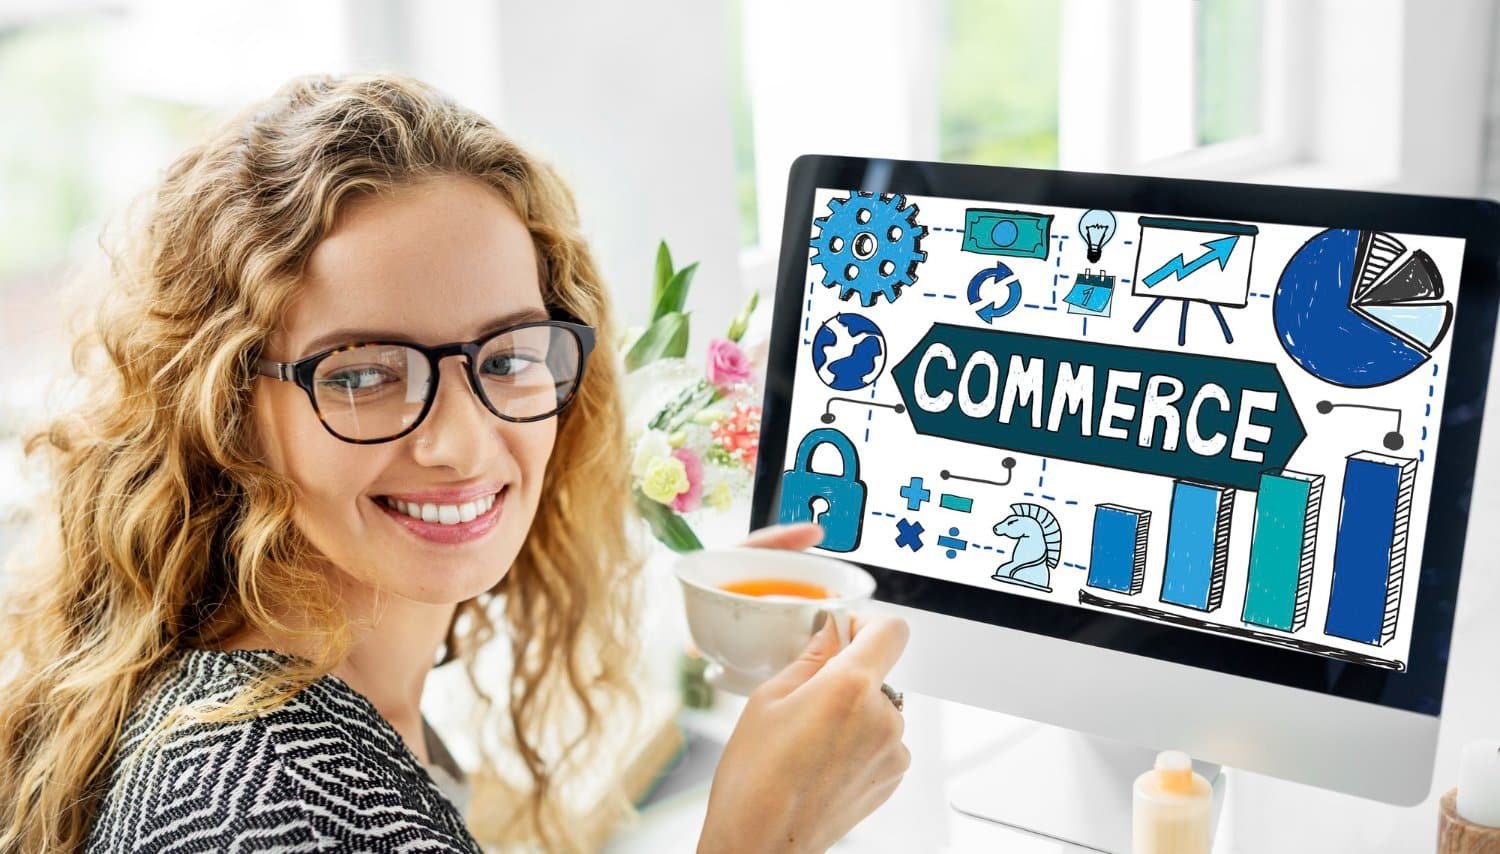 You are currently viewing Building an E-commerce Website from Scratch